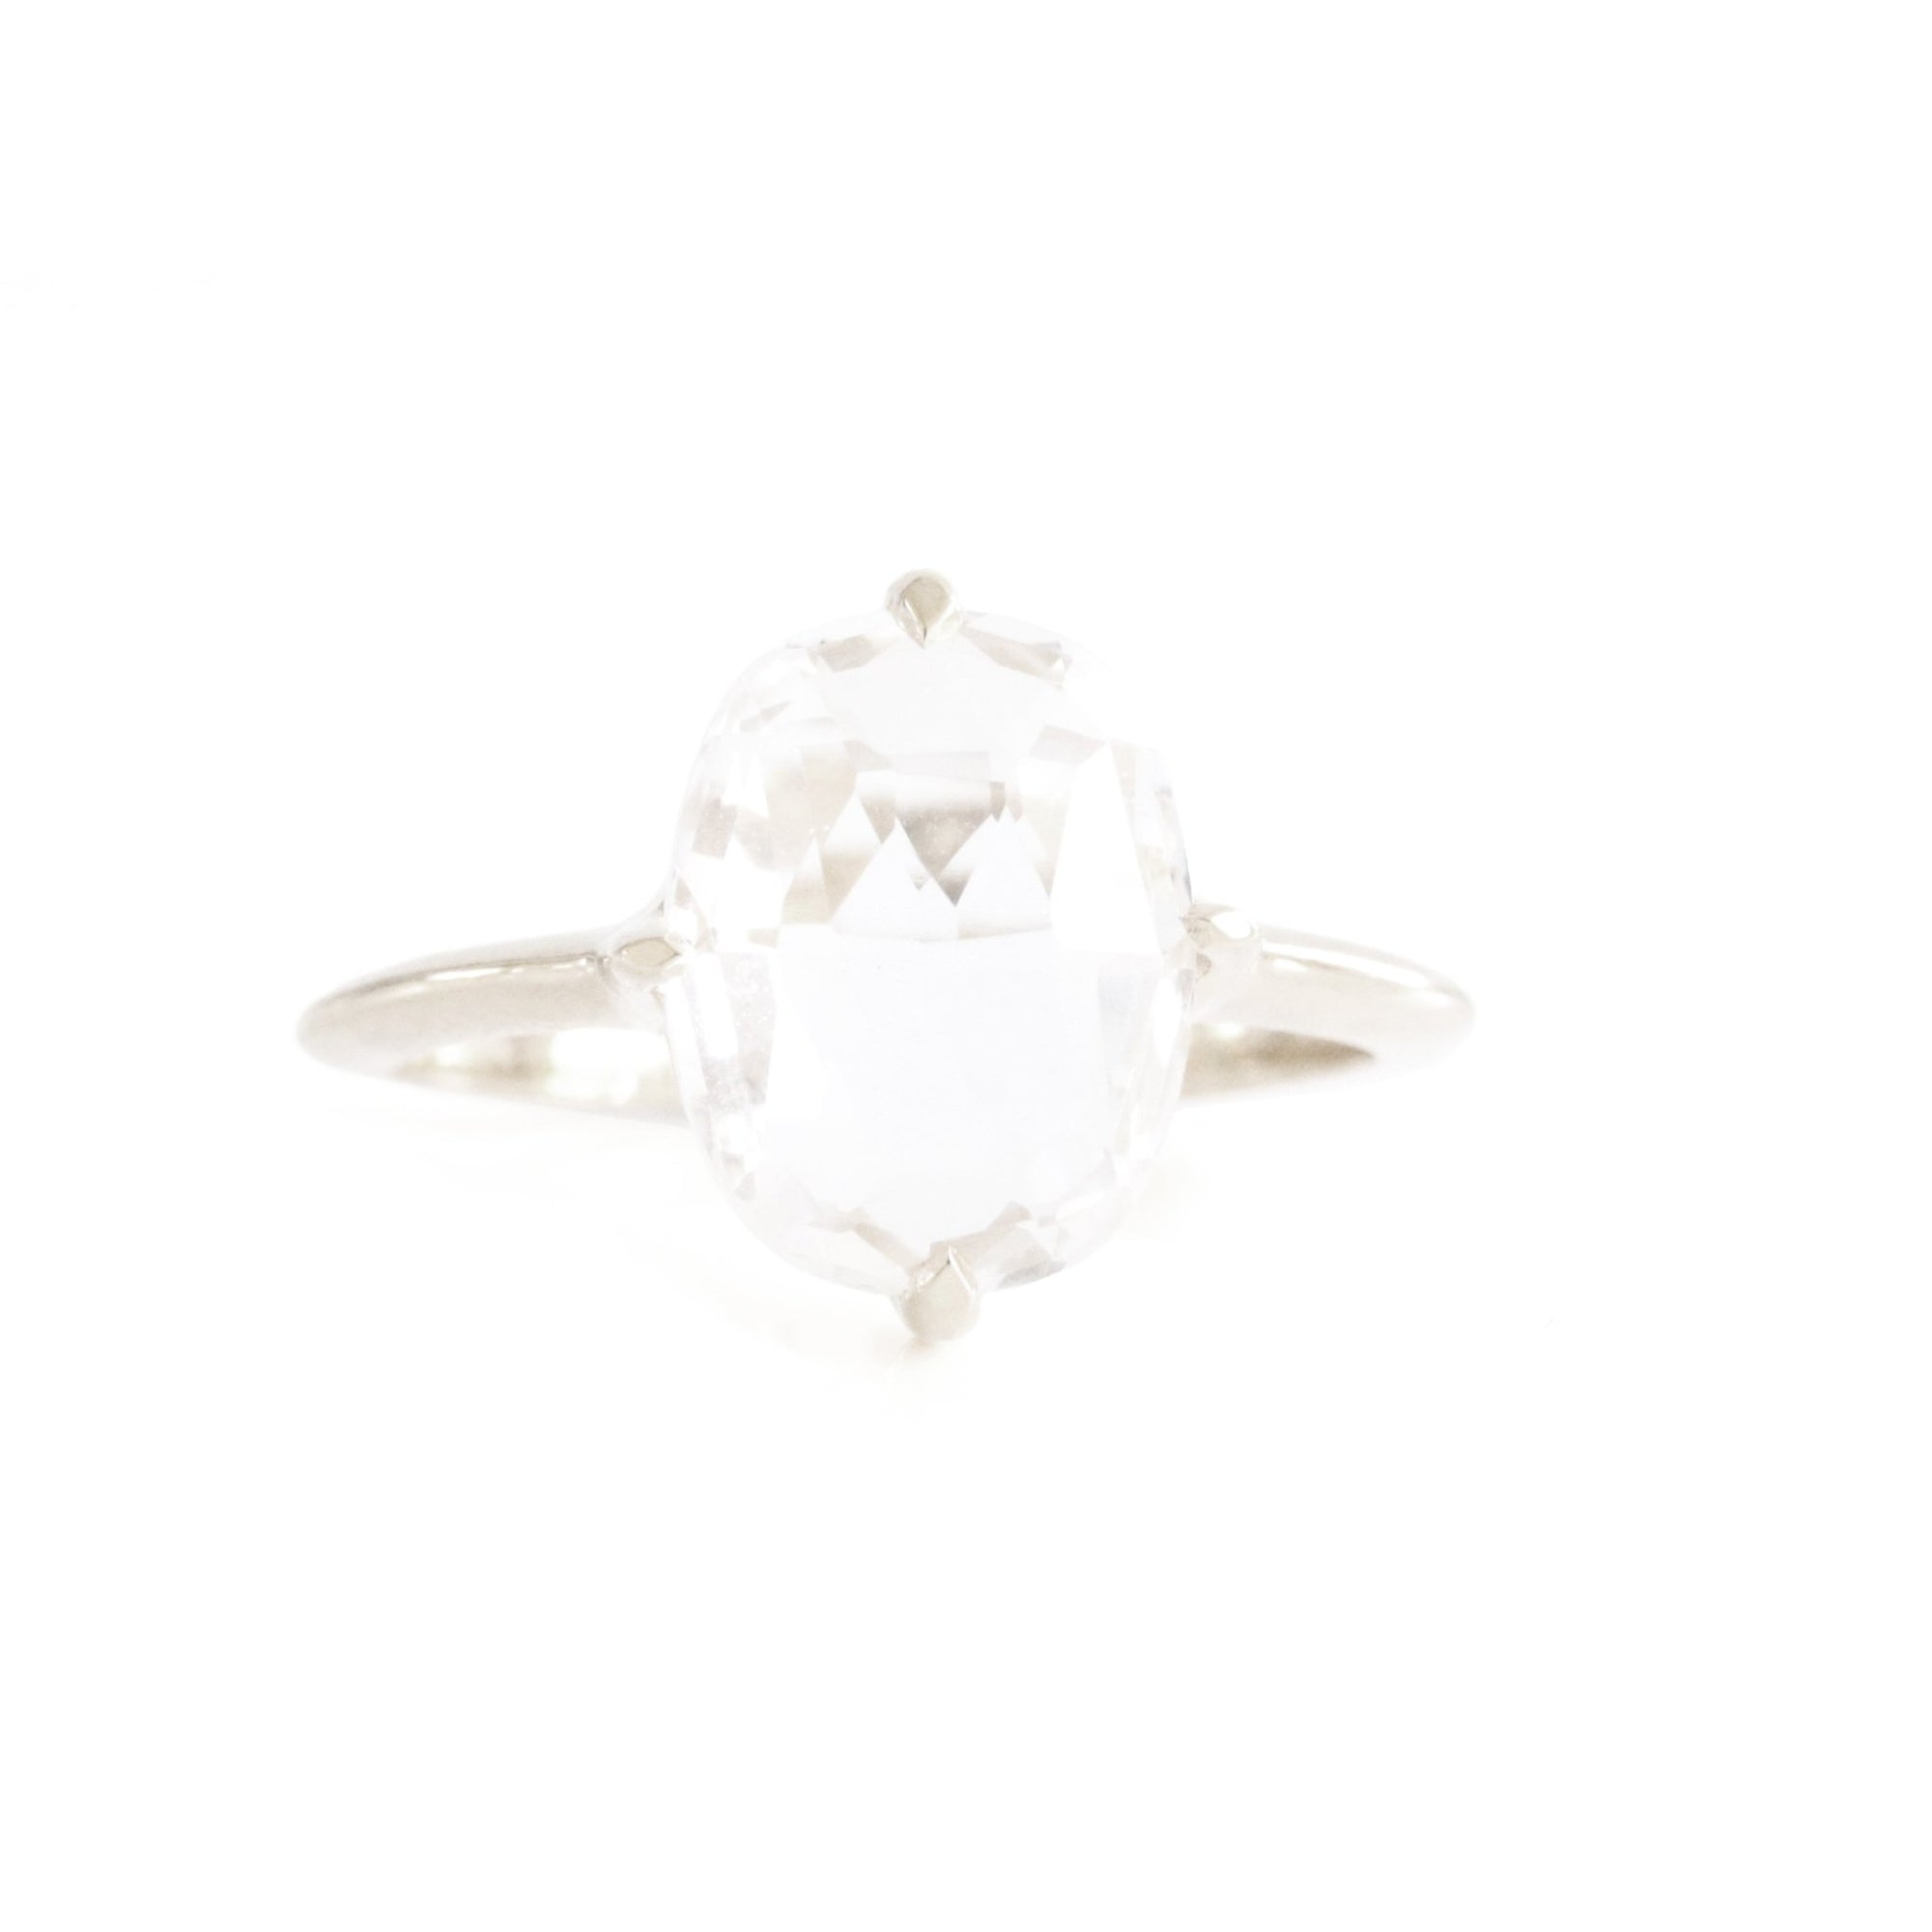 KIND OVAL SOLITAIRE RING - WHITE TOPAZ & SILVER - SO PRETTY CARA COTTER